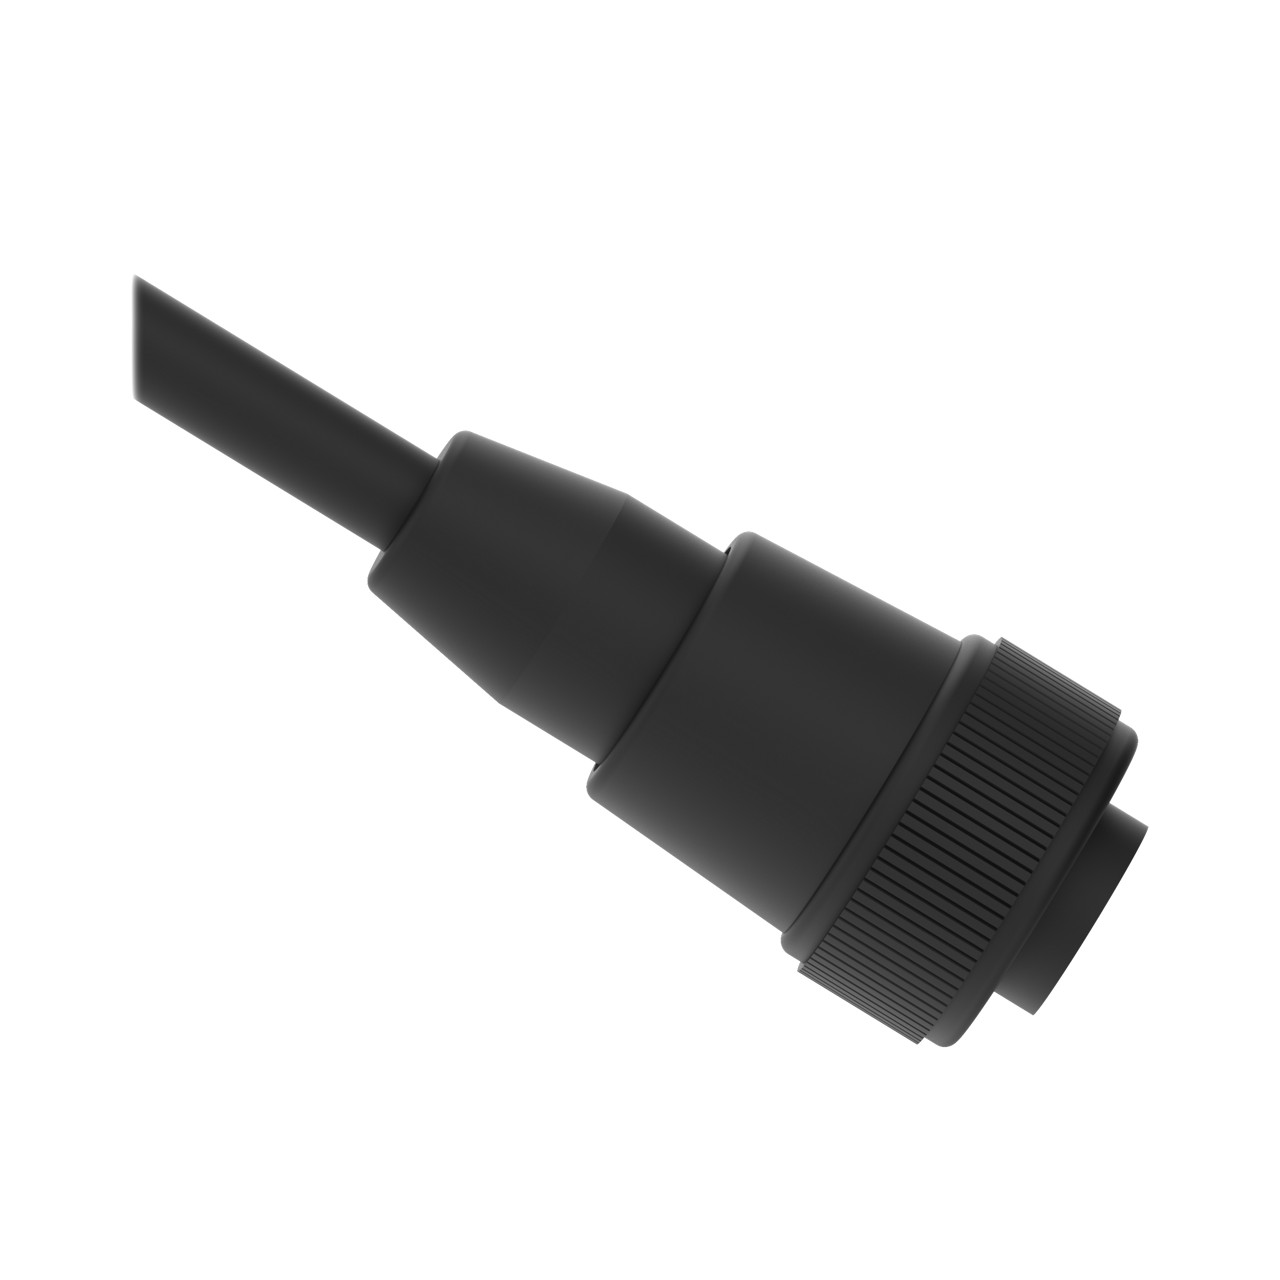 MBCC2-512 - Cordset 7/8 in Single Ended; 5-pin Straight Female Connector with Shield; 4 m (13.12 ft)